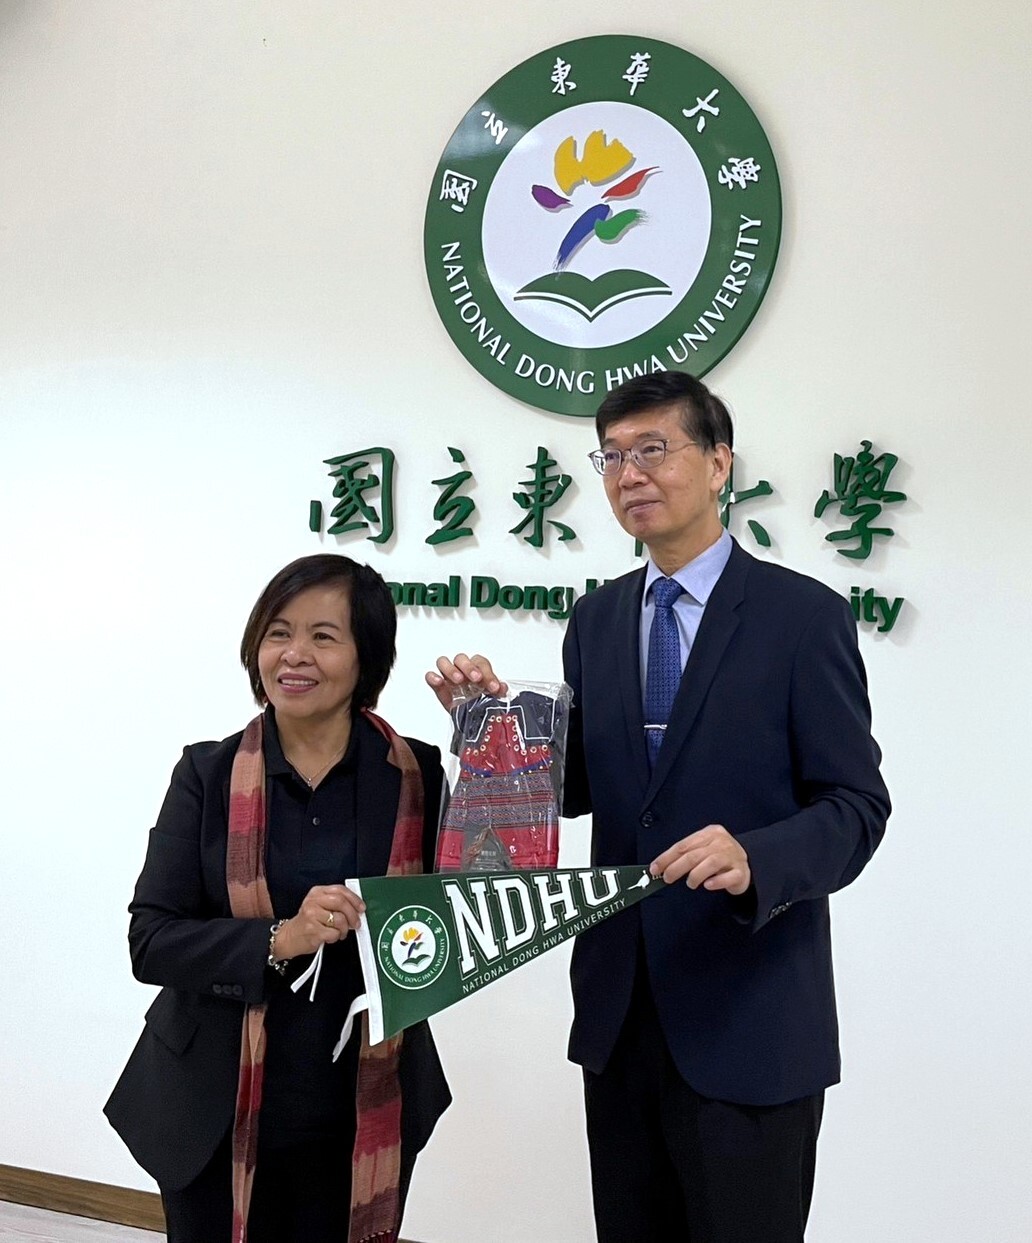 UP Baguio Chancellor Ph.D. Corazon L. Abansi and Vice President Chin-Peng Chu exchanged souvenirs